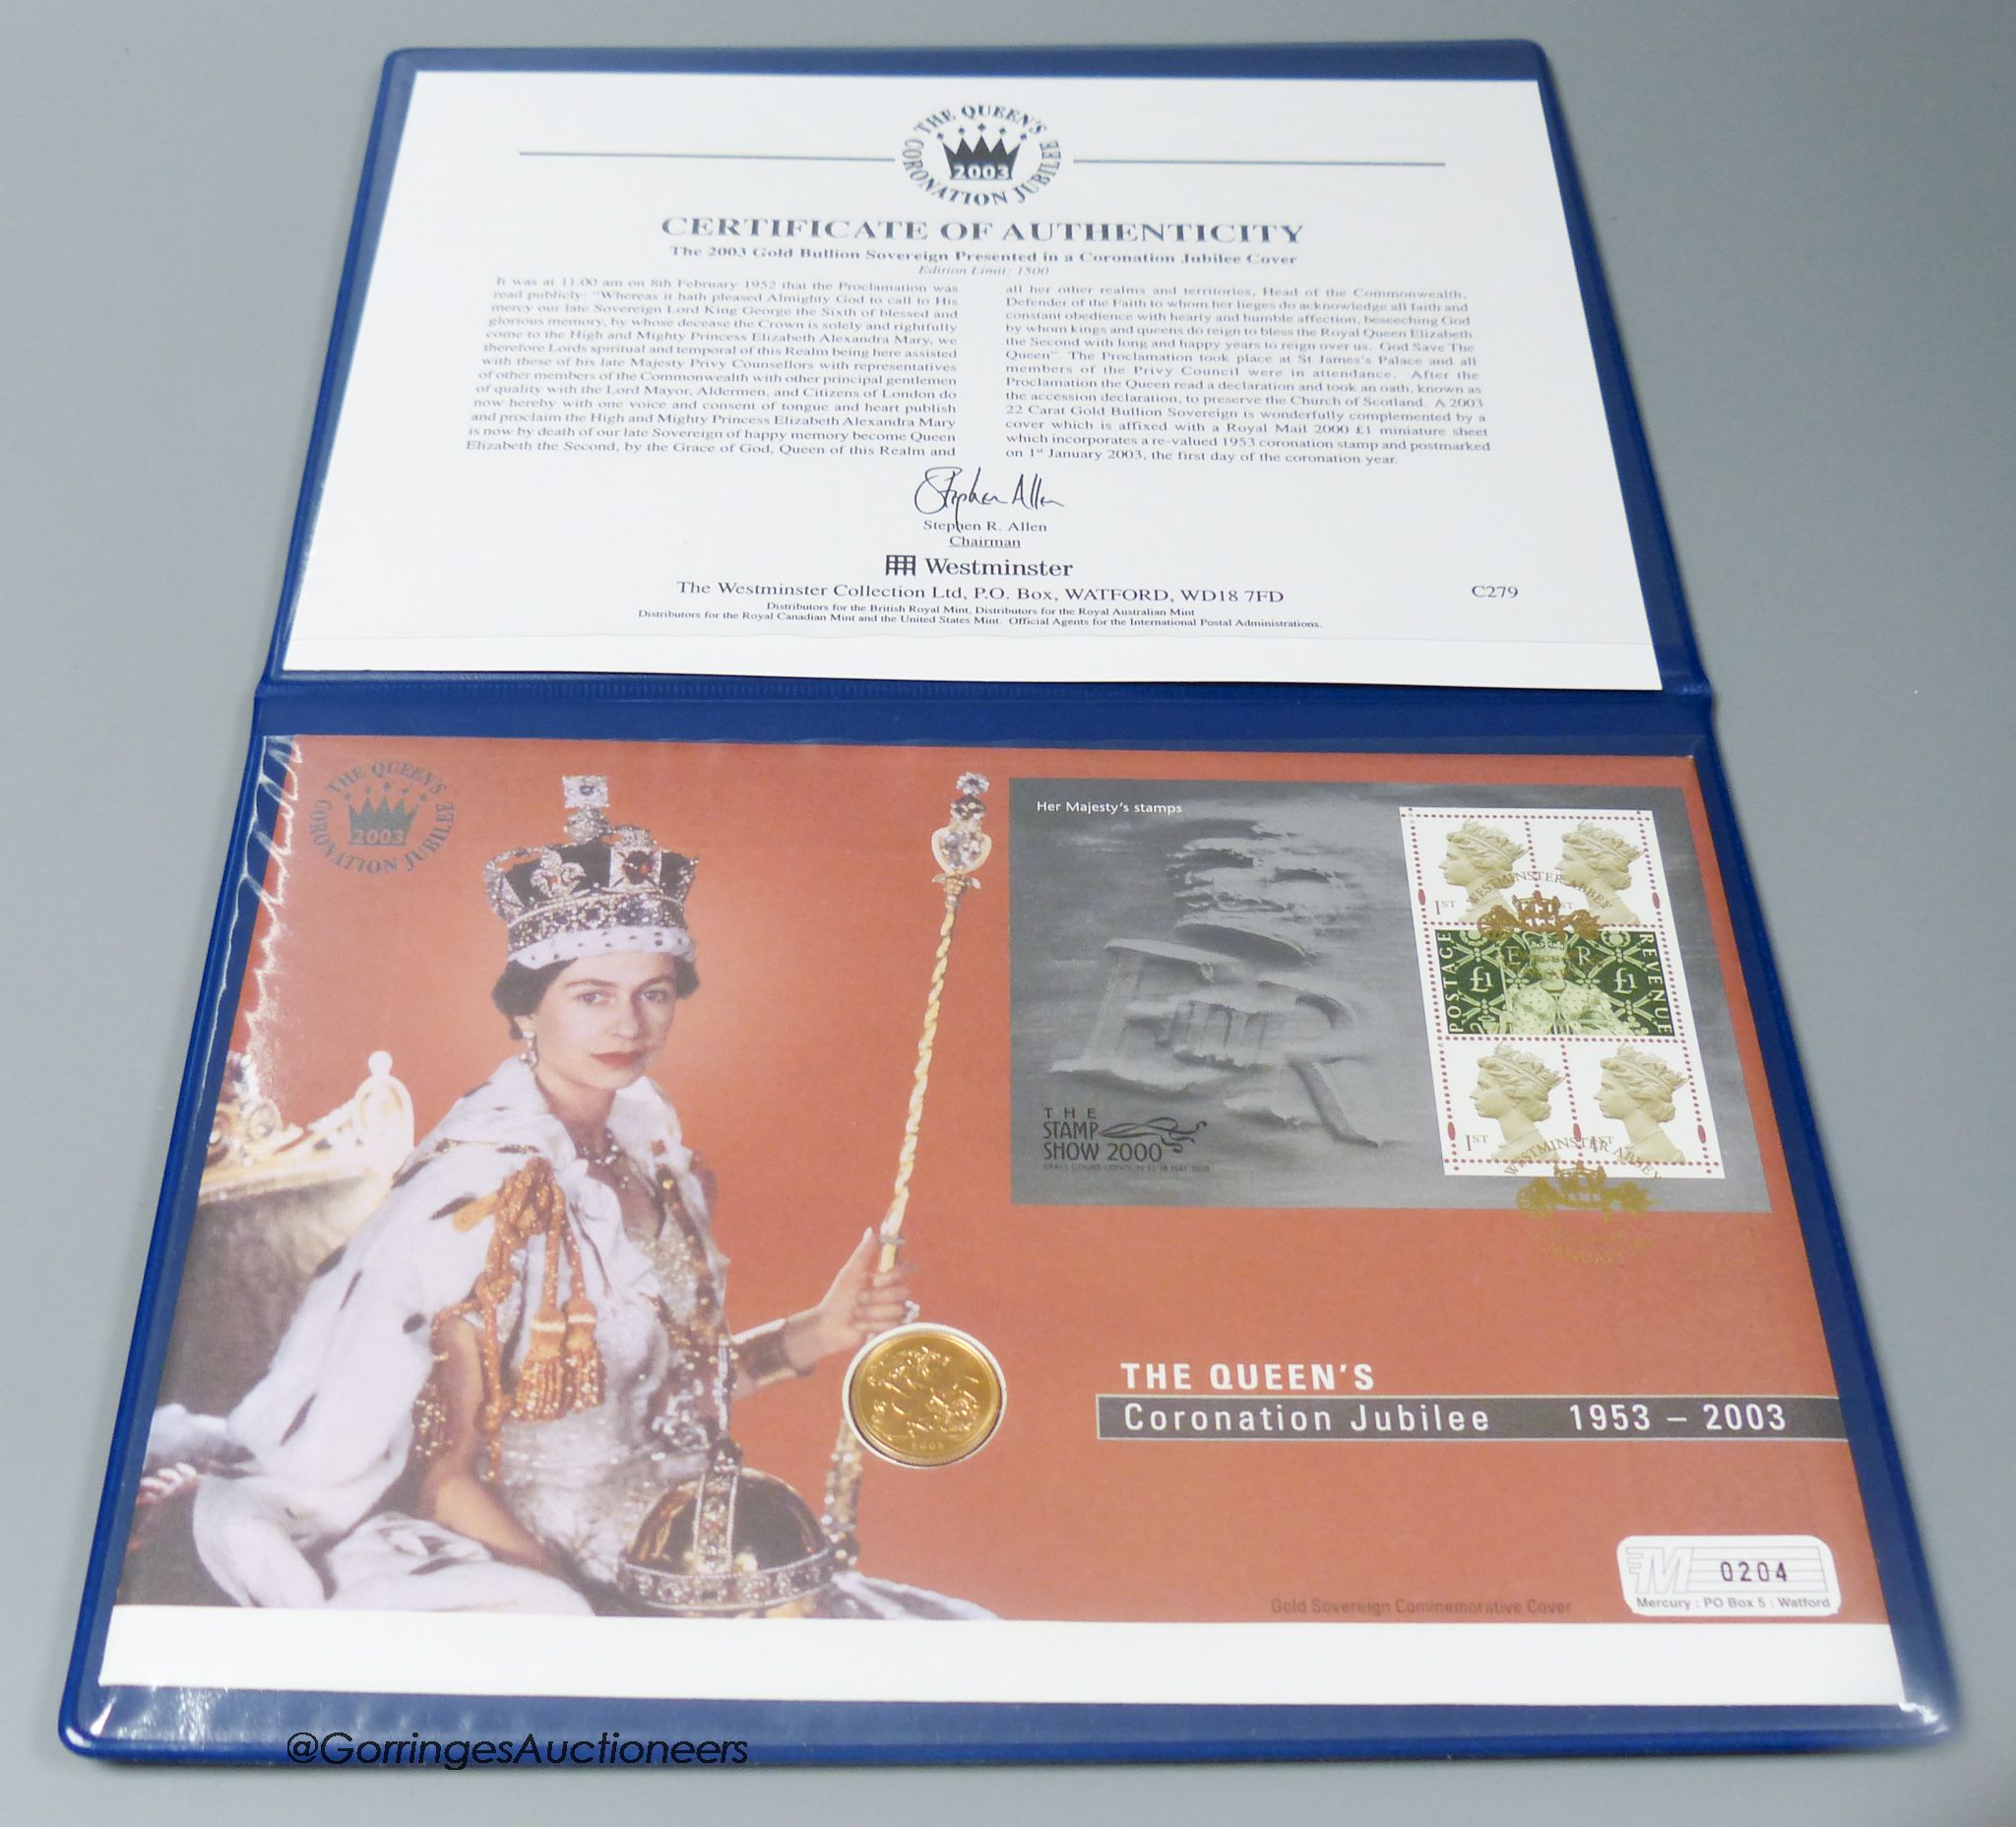 A 2003 gold bullion sovereign presented in a Coronation Jubilee cover, with certificate of authenticity.